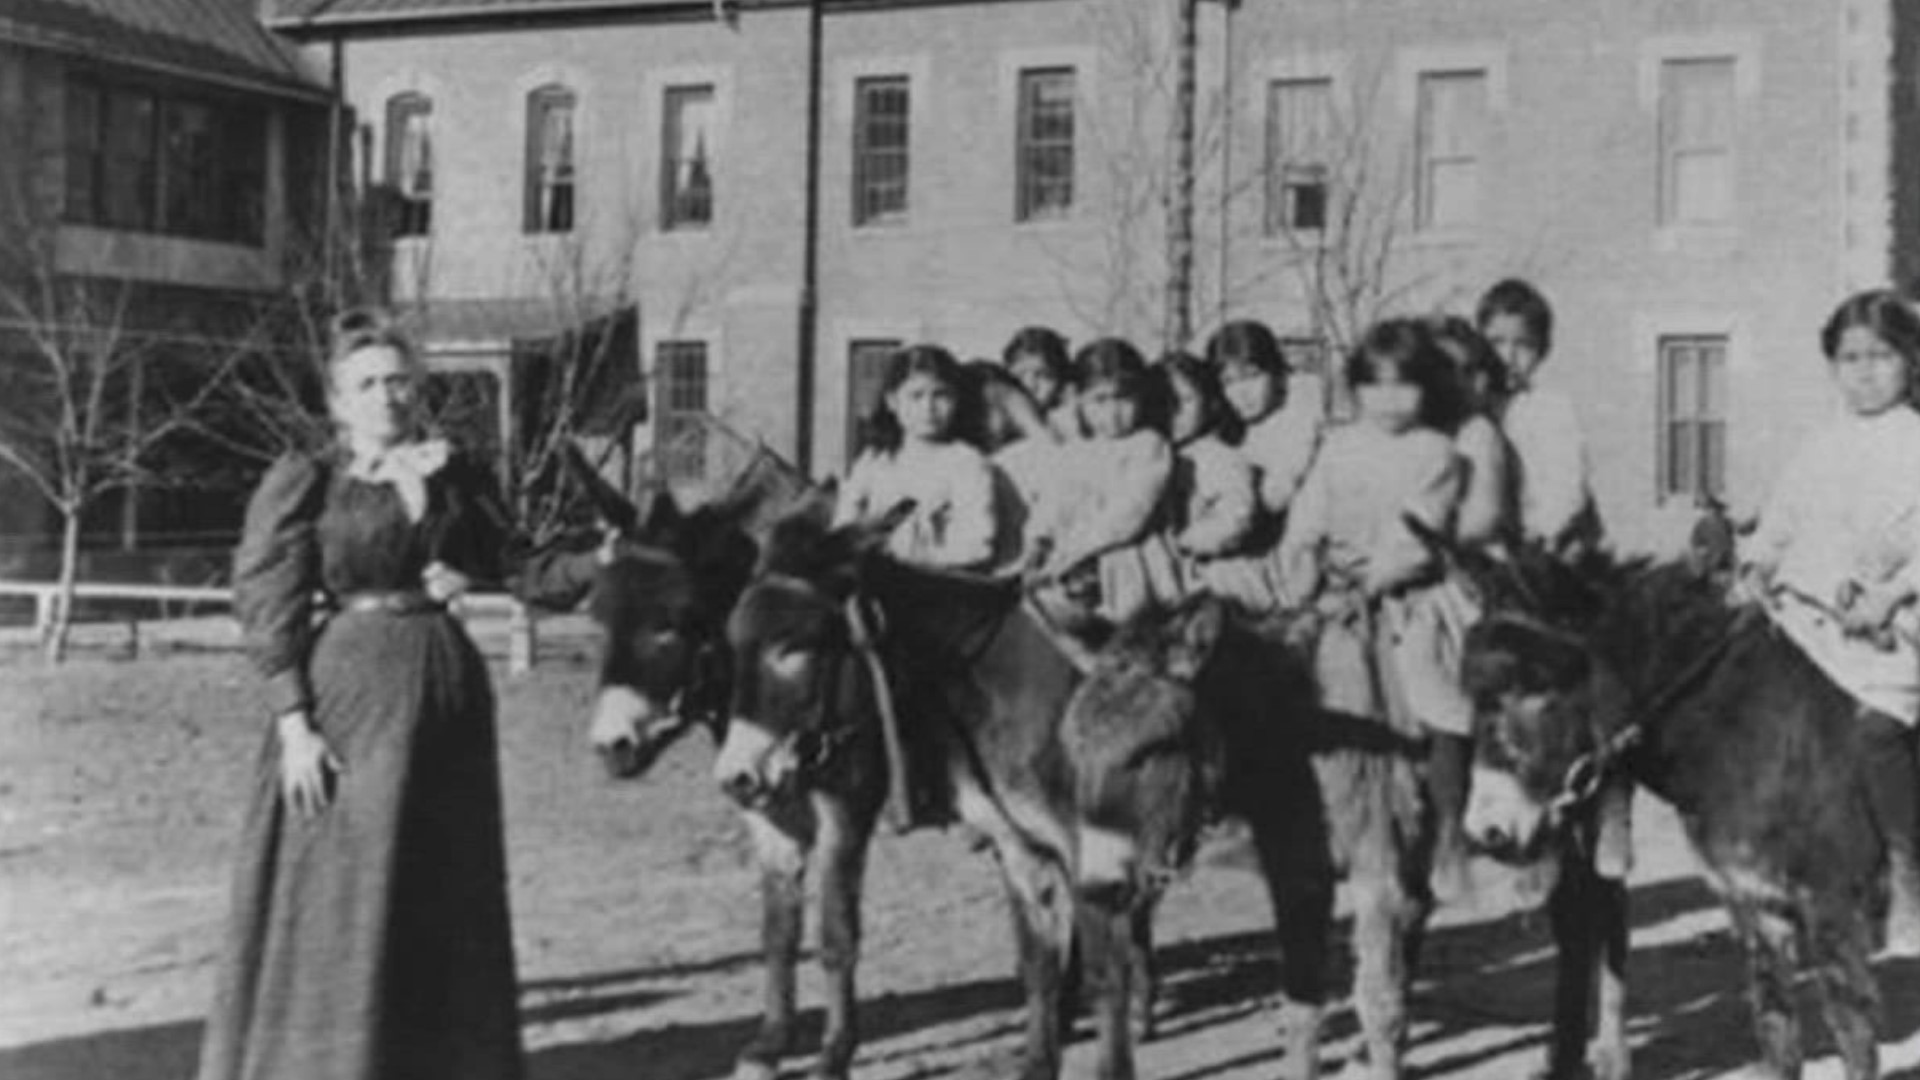 Up until the 1960s, hundreds of thousands of Native American children were forcibly removed from their homes and placed in government-run boarding schools.